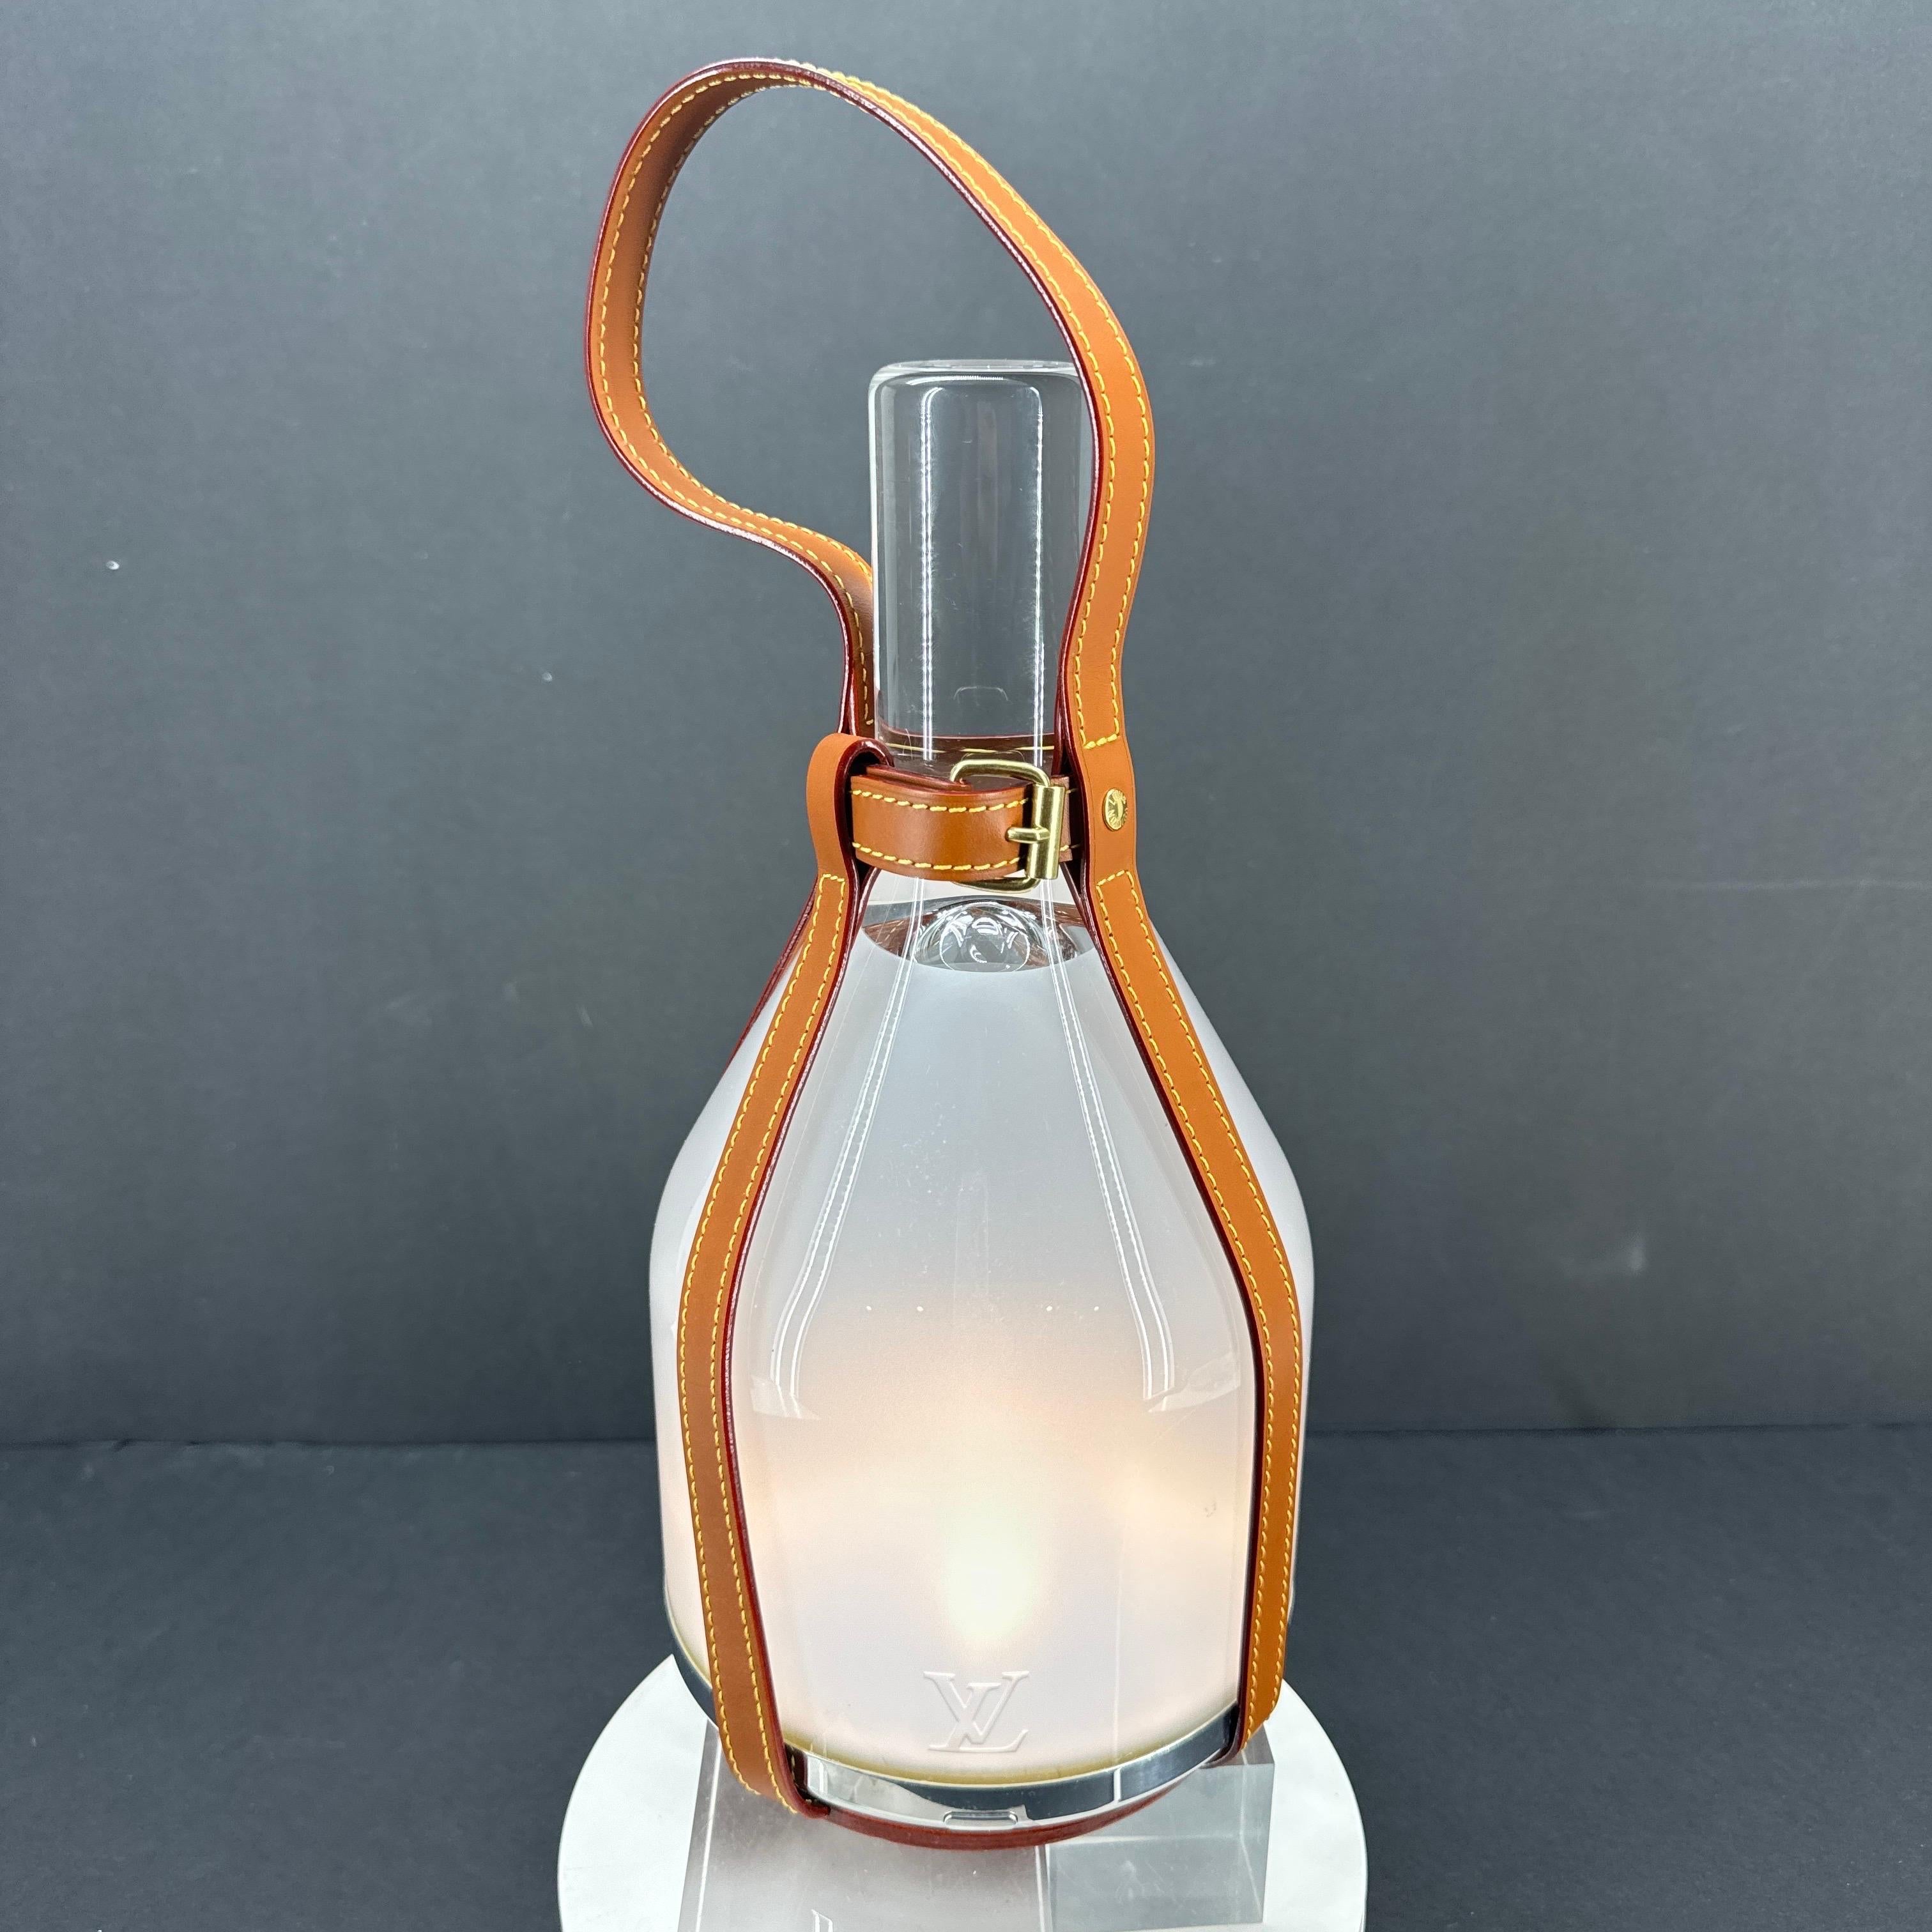 LV Bell Table Lamp in Frosted and Clear Glass with Caramel Leather Straps by Louis Vuitton, France.

Designers Edward Barber and Jay Osgerby have combined modern and traditional in this fantastic table lamp from Louis Vuitton. There is 30 hours of